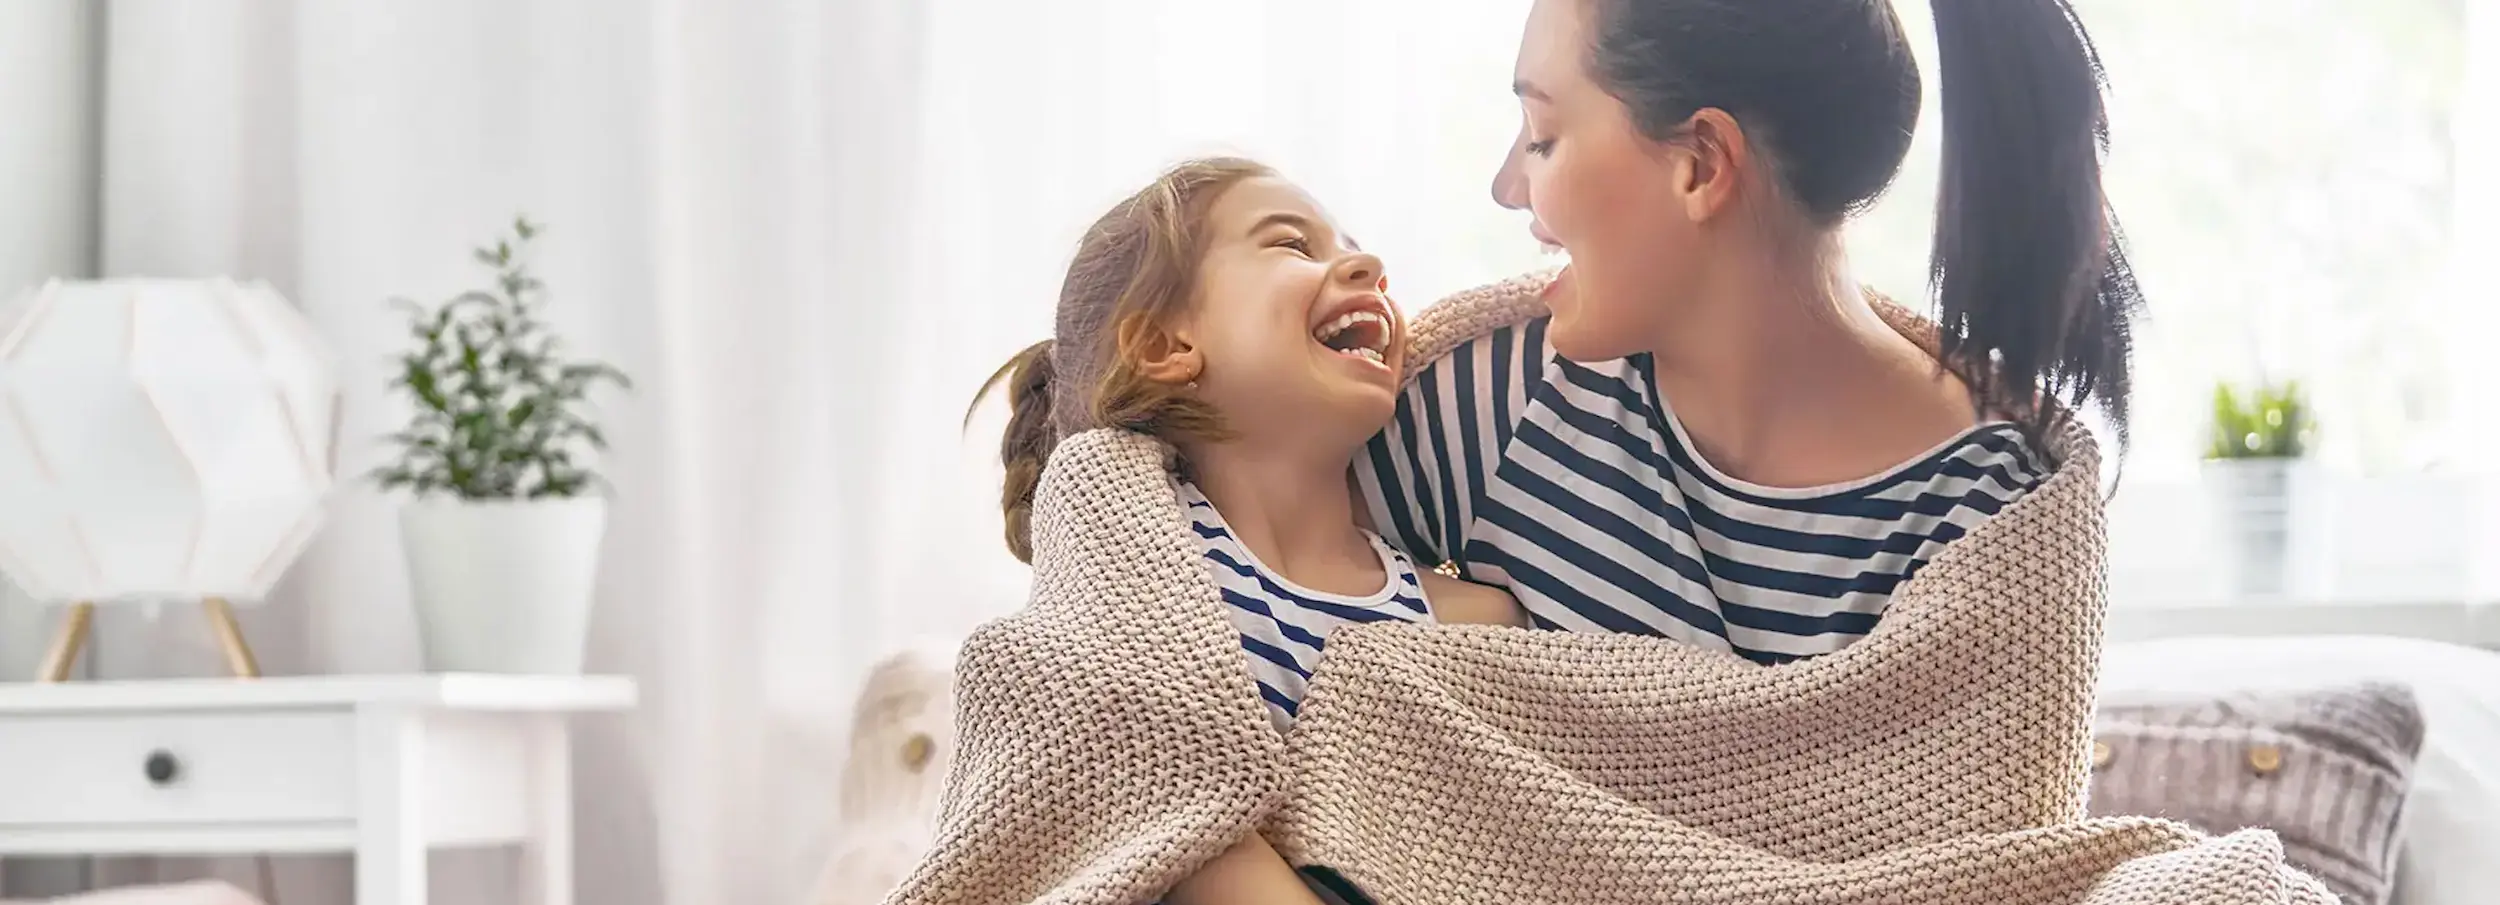 Mother and daughter wrapped in taupe blanket together smiling and laughing in brightly lit living room.